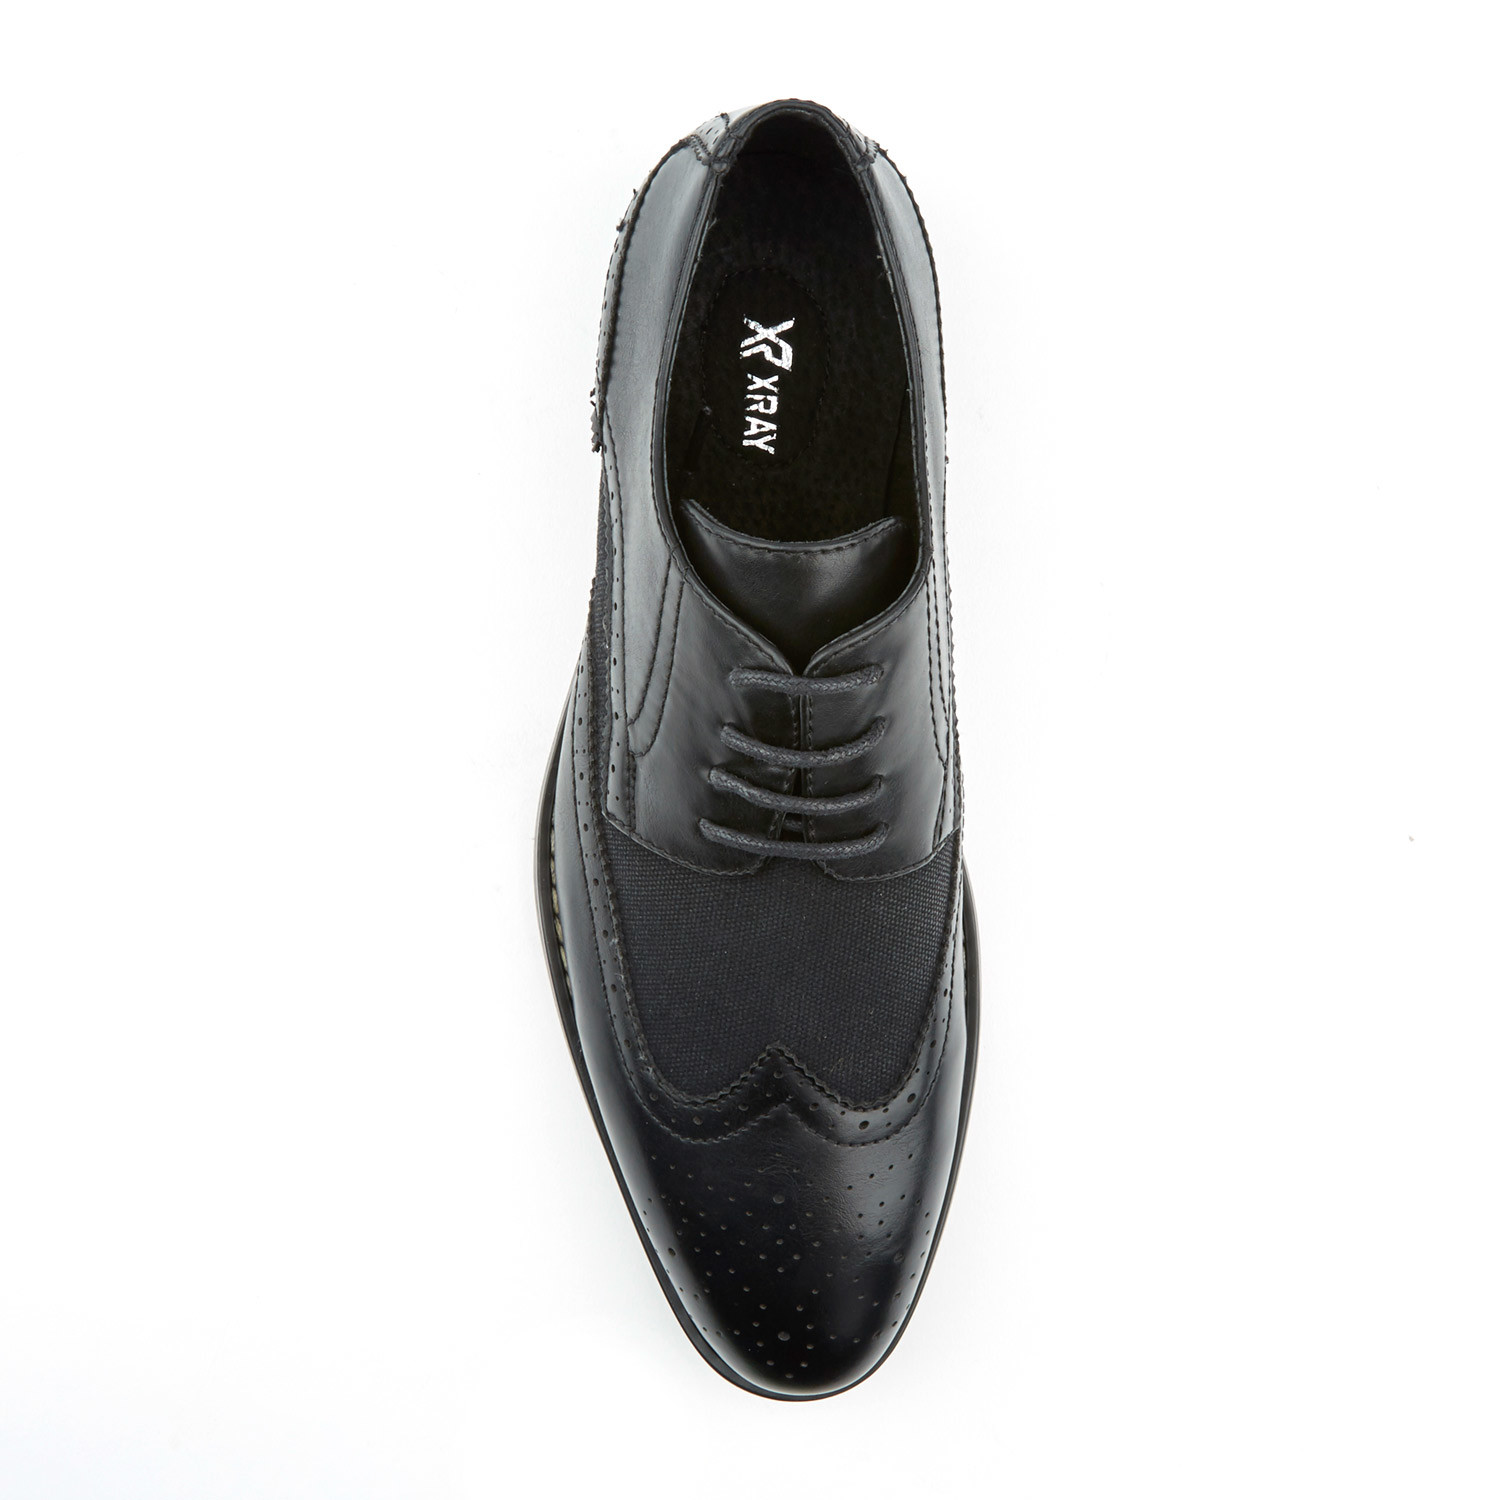 Xray Shoes // Freeman Wingtip Oxford // Black (US: 11) - Casual Shoes ...